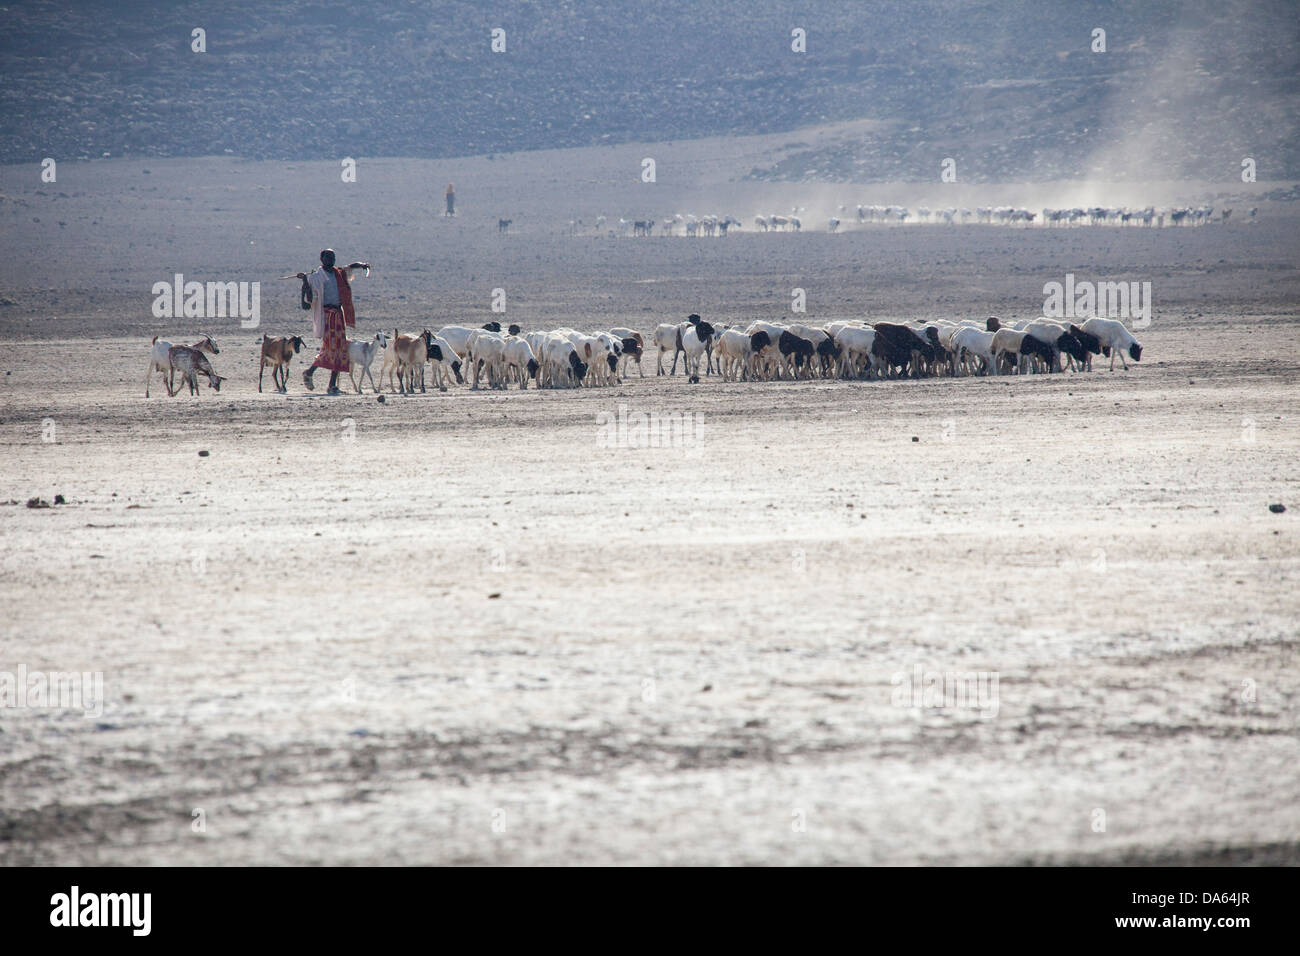 herd of goats, goats, nanny goats, Abbesee, Djibouti, Africa, scenery, landscape, nature, lake, lakes, agriculture, desert Stock Photo